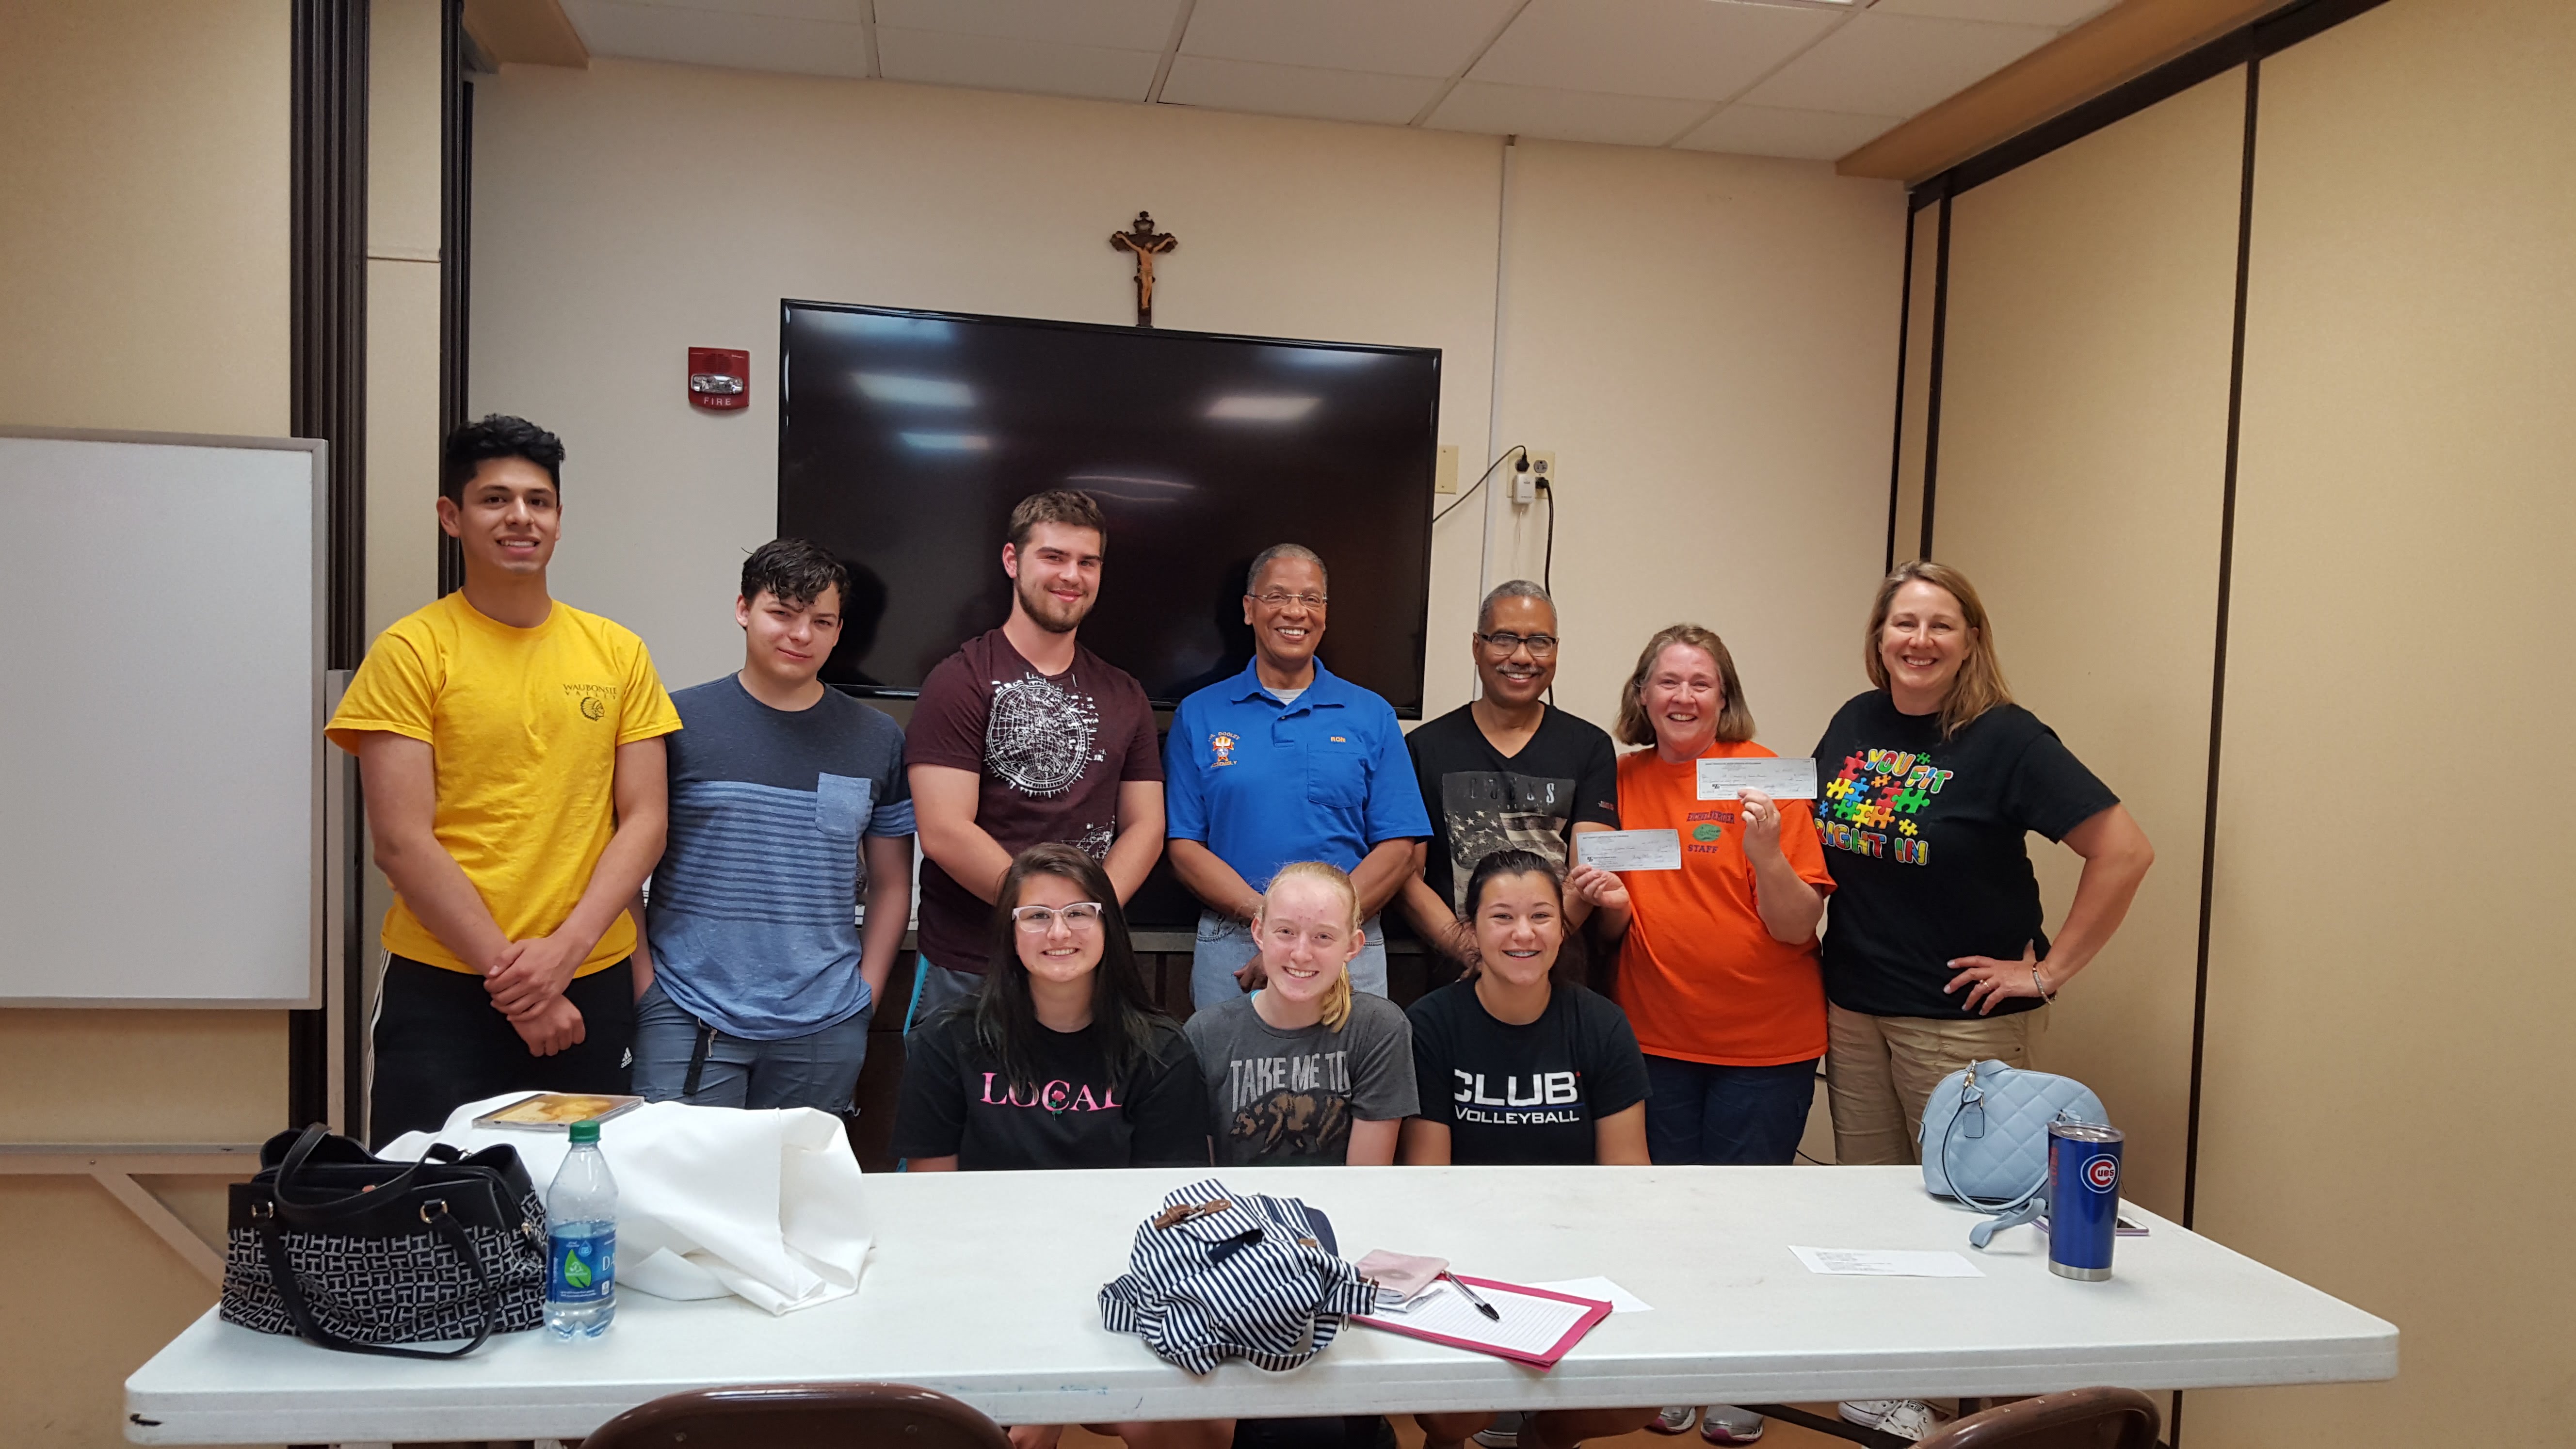 The Teen Mission Group Achieves Their Goal